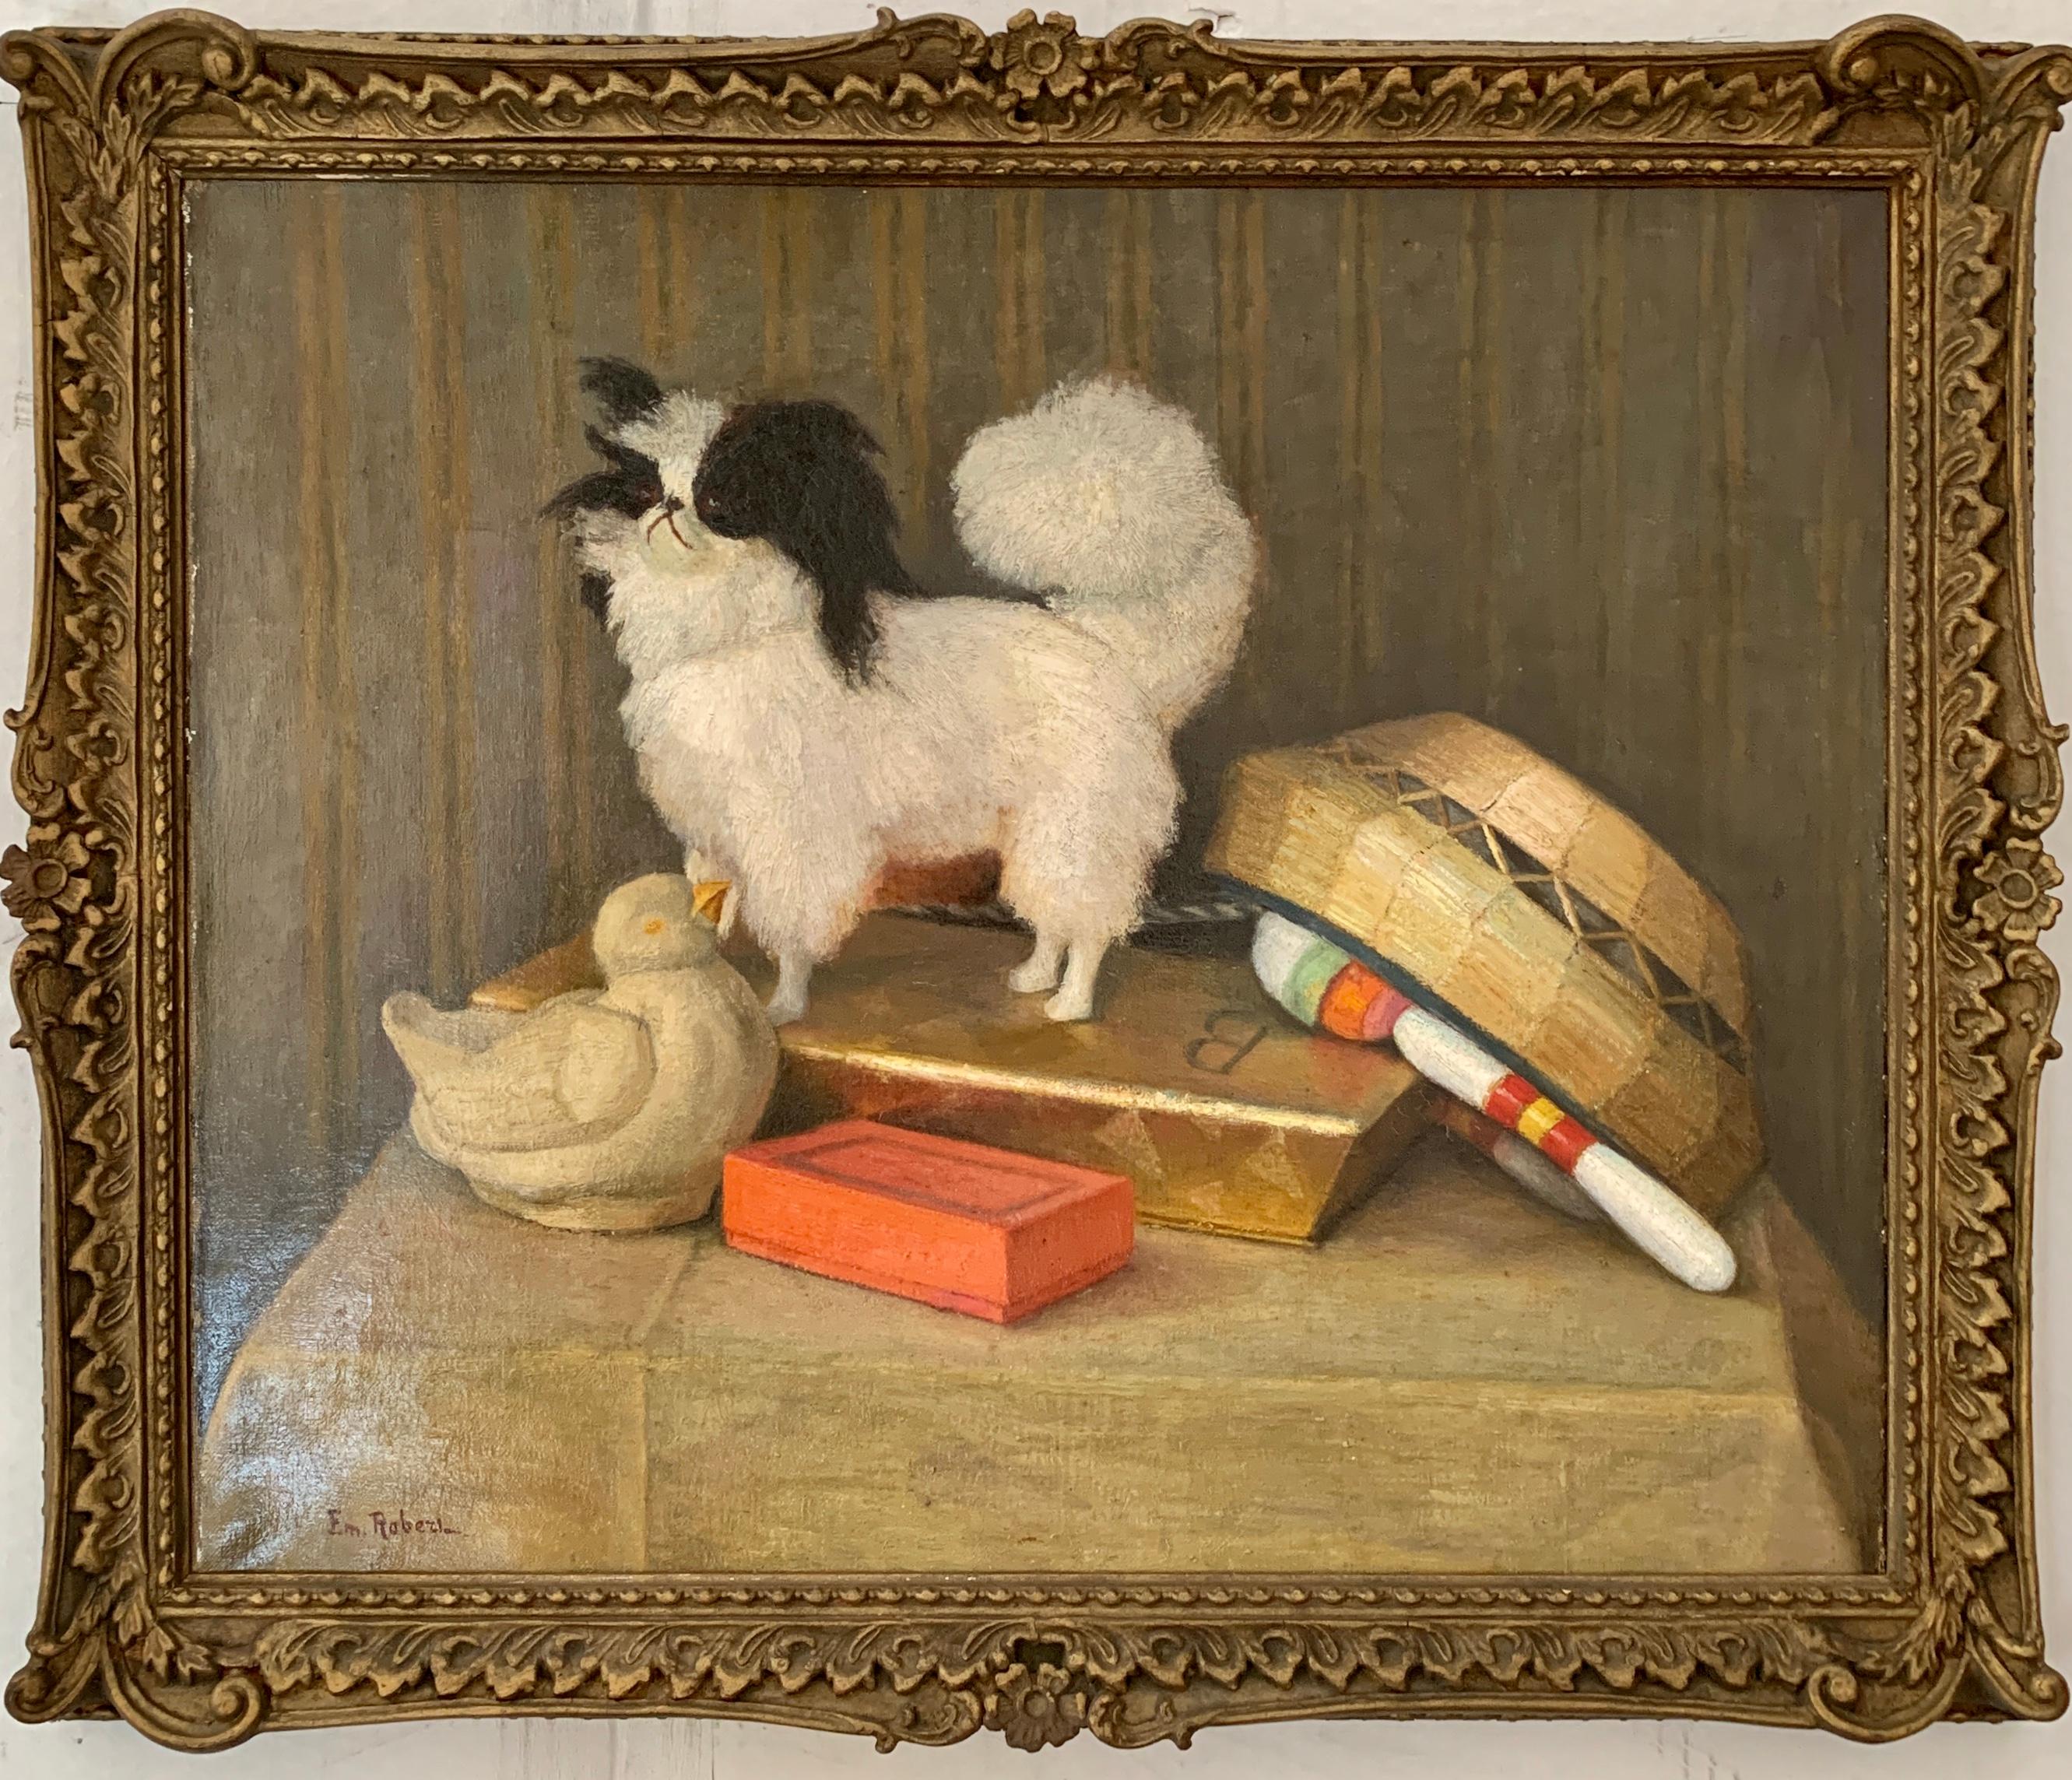 E.Robert Animal Painting - French 19th century portrait of a Papillon dog with its toys, books and basket.